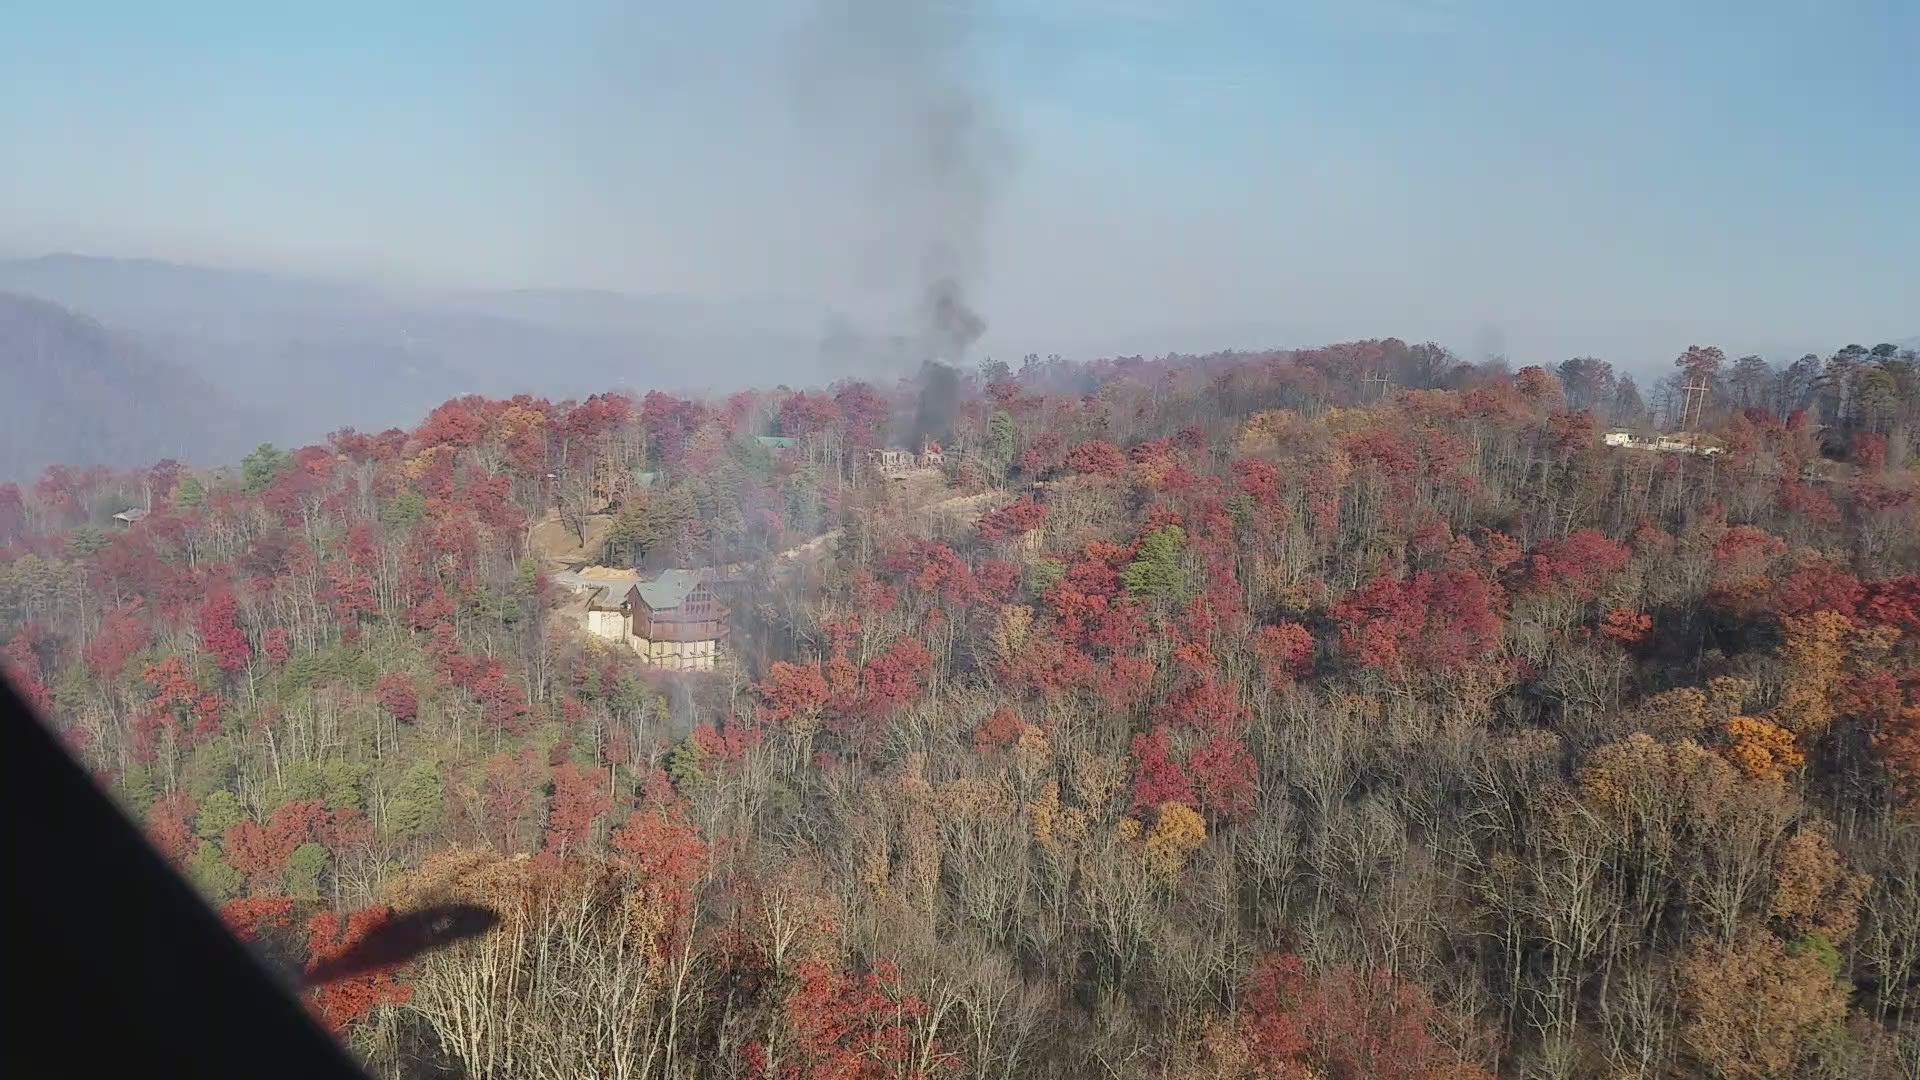 View from the cockpit of Black Hawk as pilots make bucket drops on structure/wildfire. Courtesy: Tennessee Army National Guard